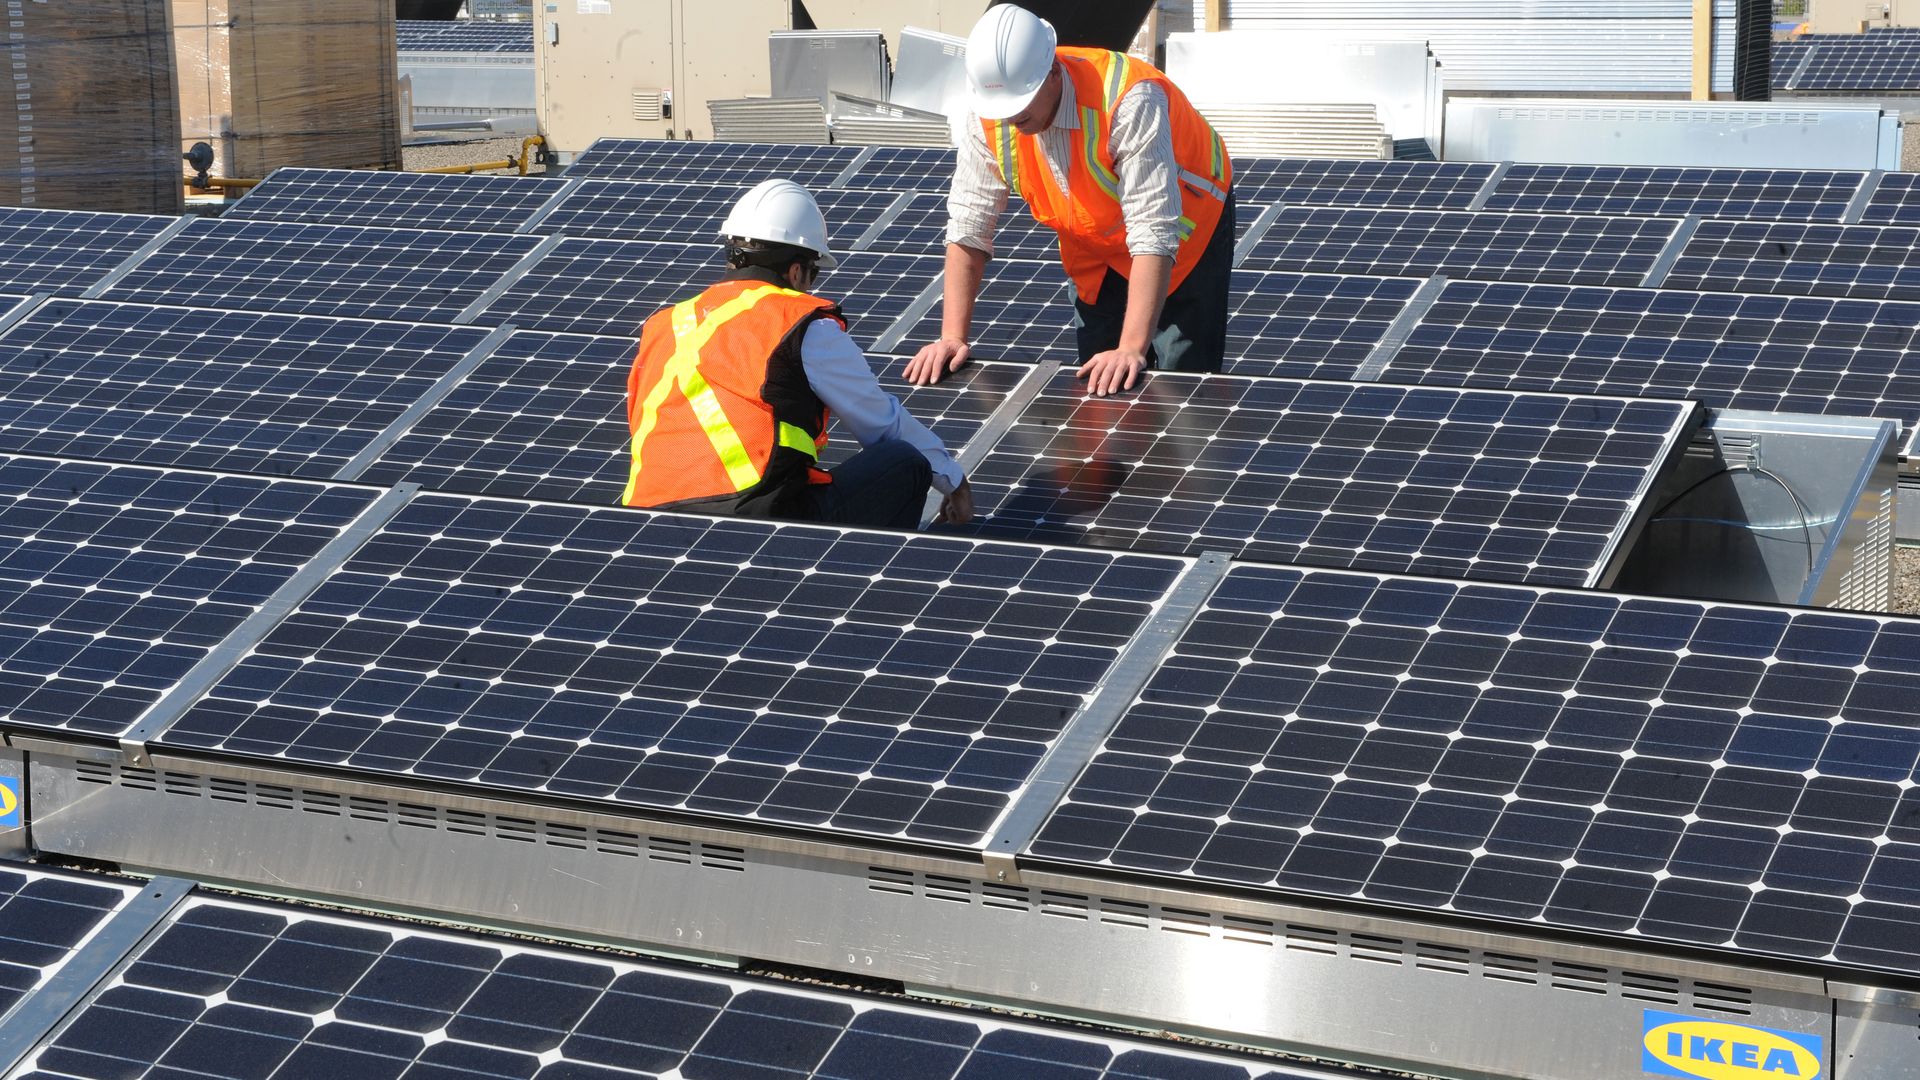 Workers install solar panels on the roof of an Ikea